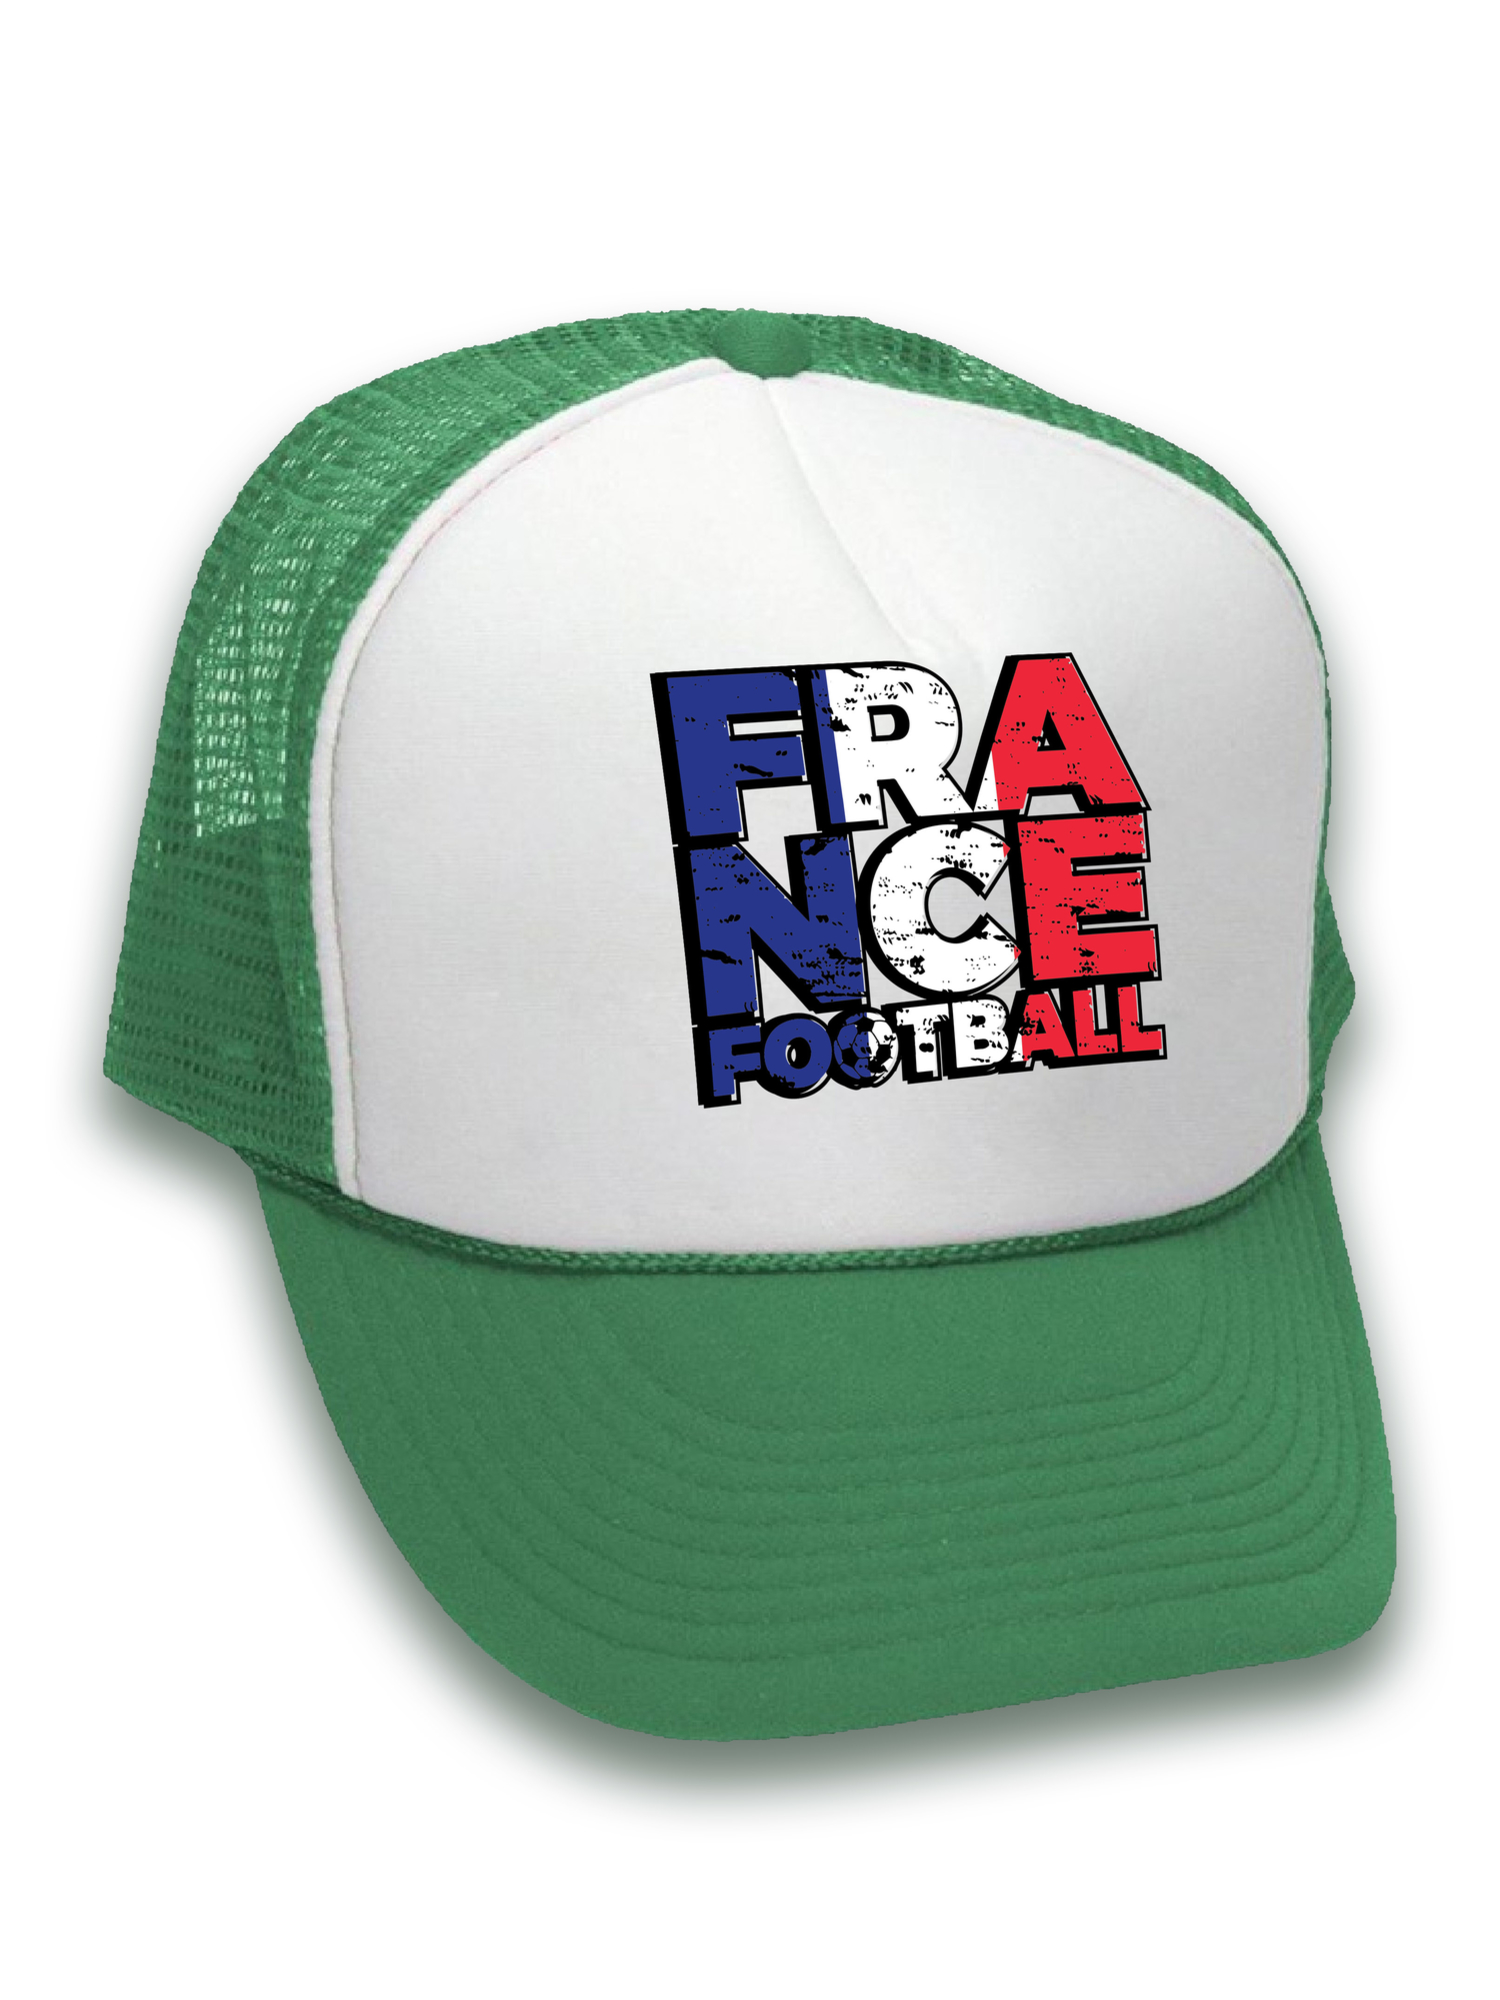 Awkward Styles France Football Hat France Trucker Hats for Men and Women Hat Gifts from France French Soccer Cap French Hats Unisex France Snapback Hat France 2018 Trucker Hats France Soccer Hat - image 2 of 6